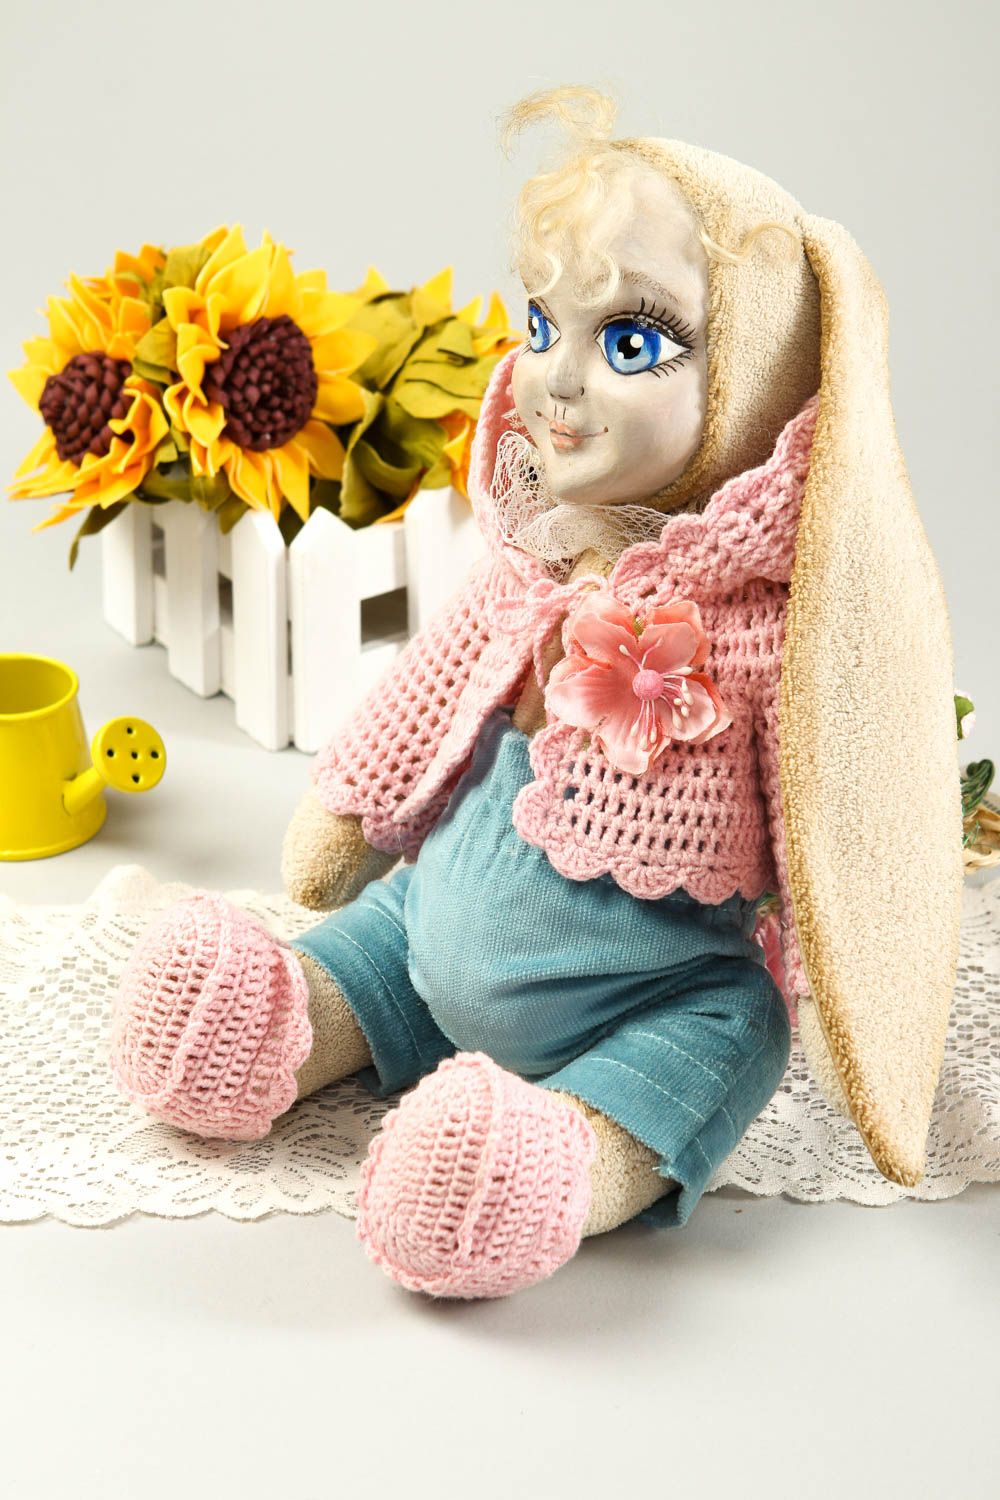 Handmade soft doll designer toys collectible doll home decor unique gifts photo 1